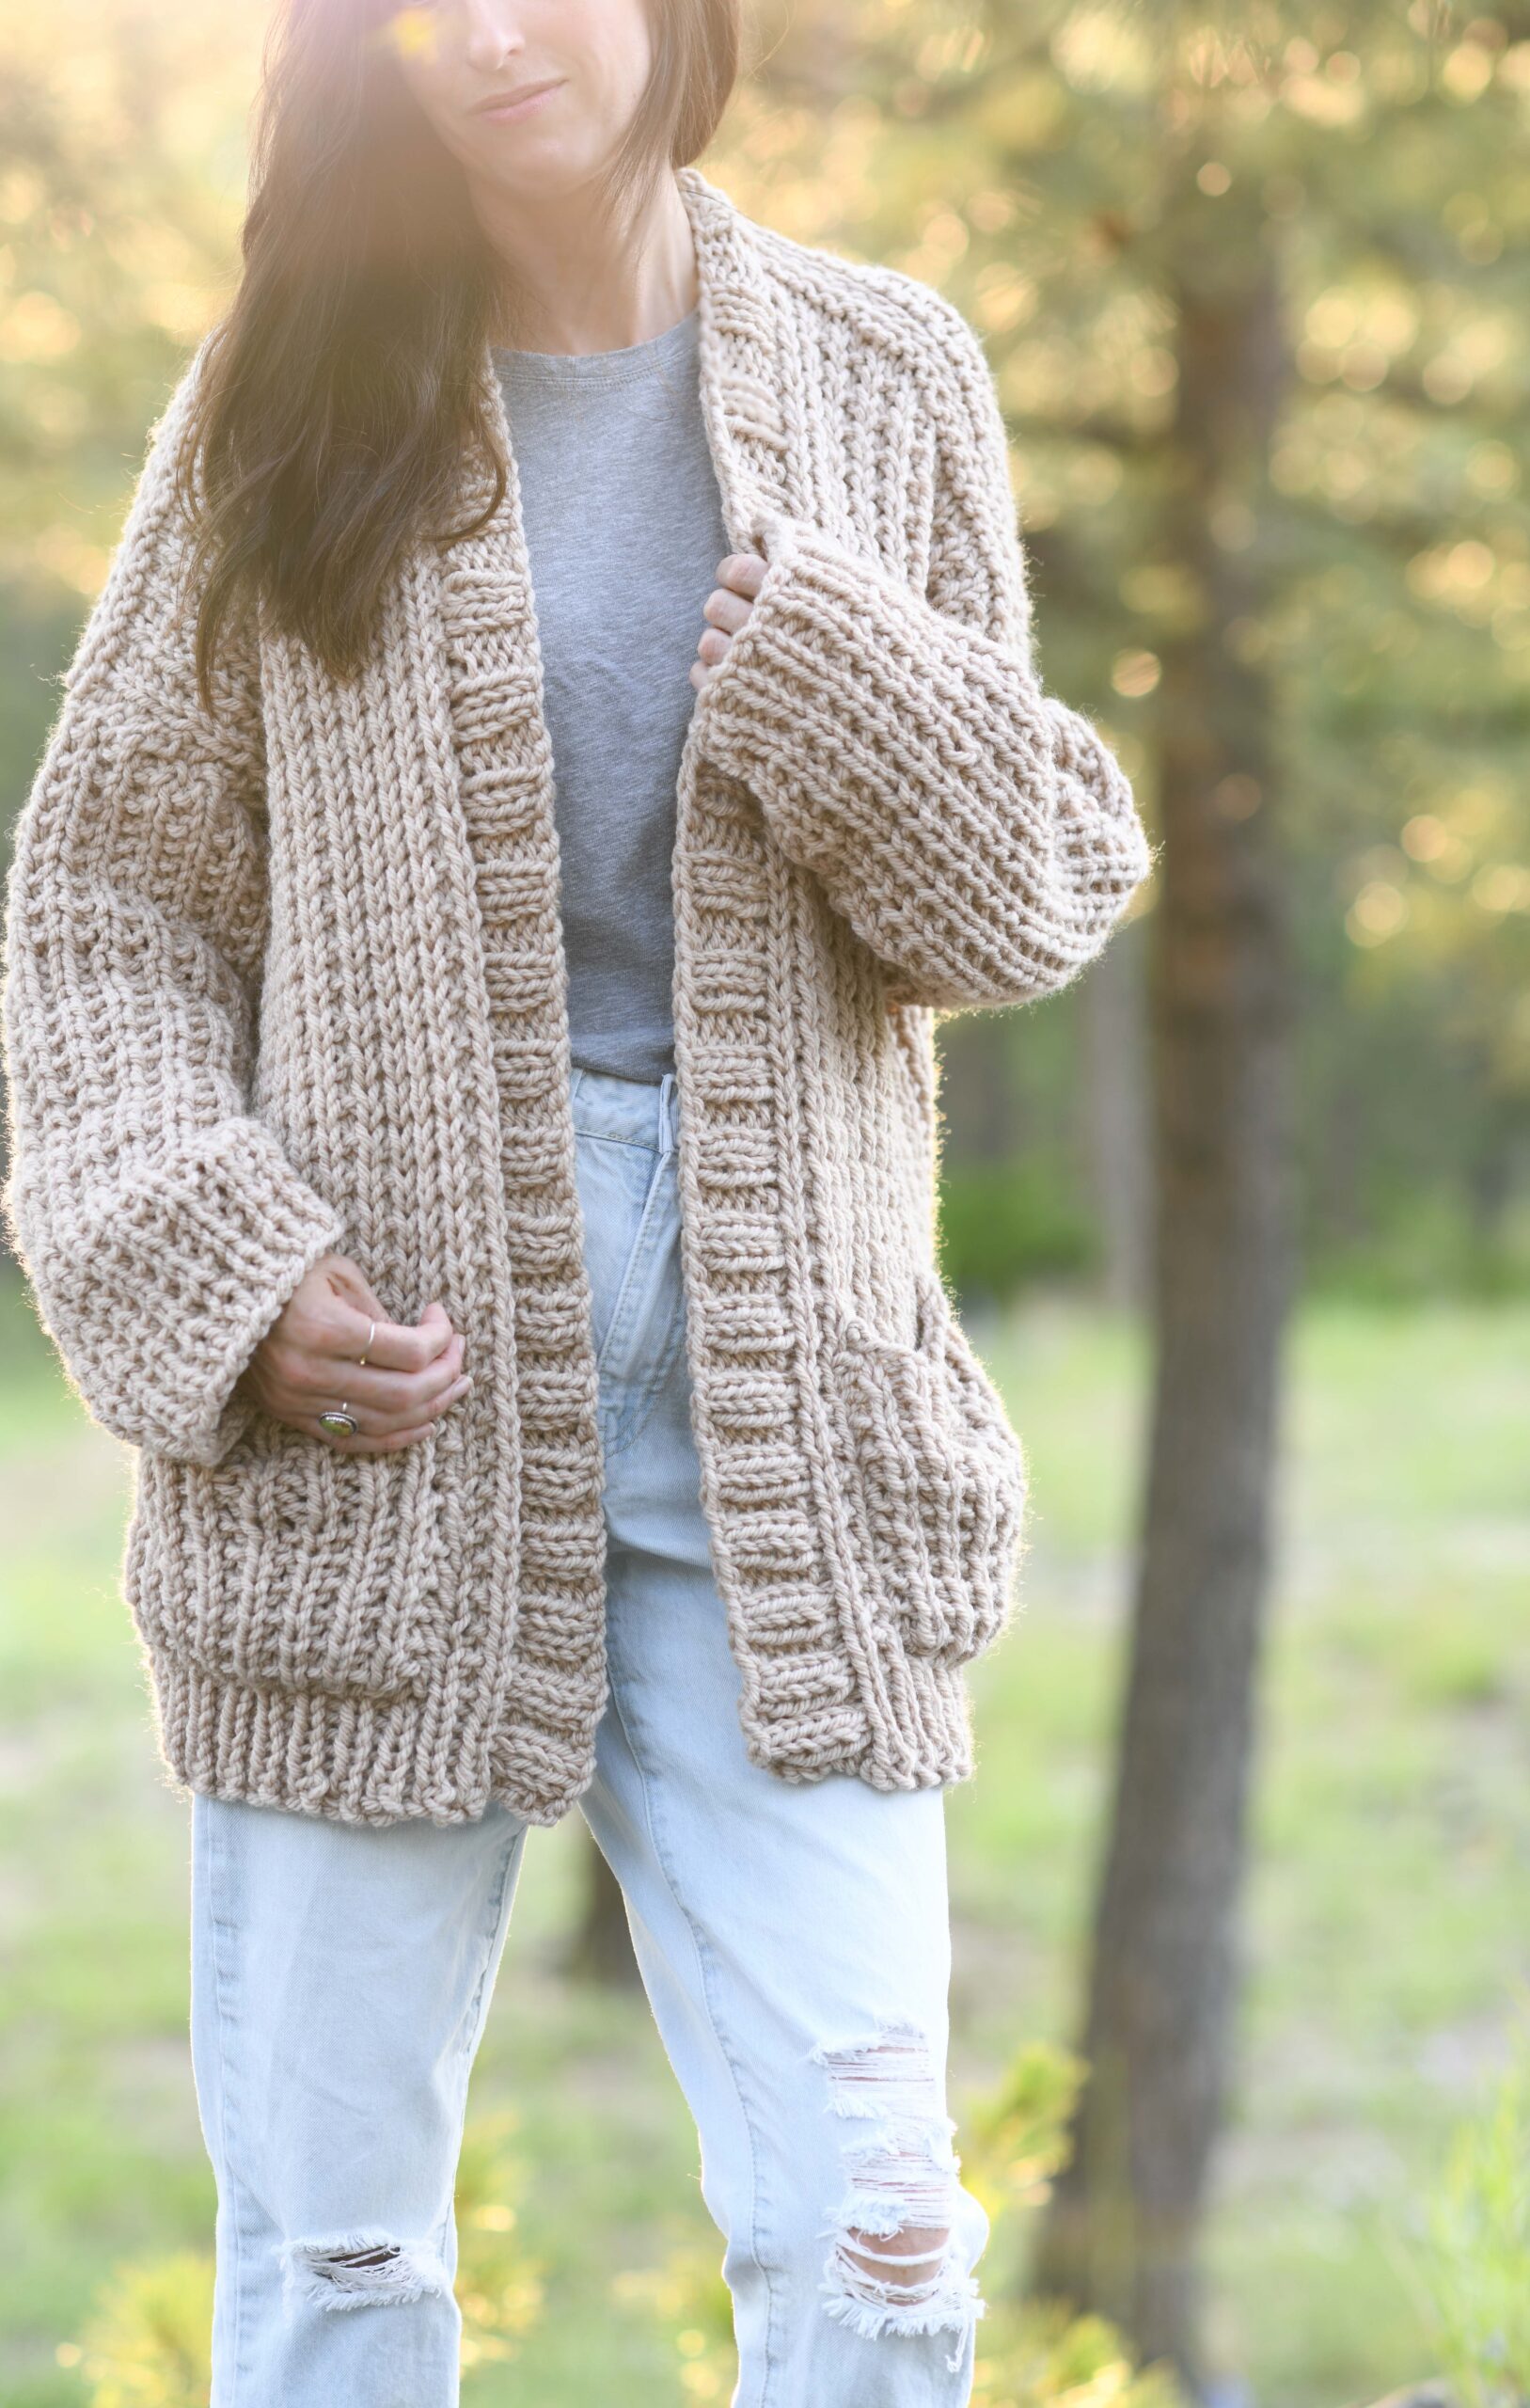 Celsea Button Up Crochet Cardigan - A Crocheted Simplicity